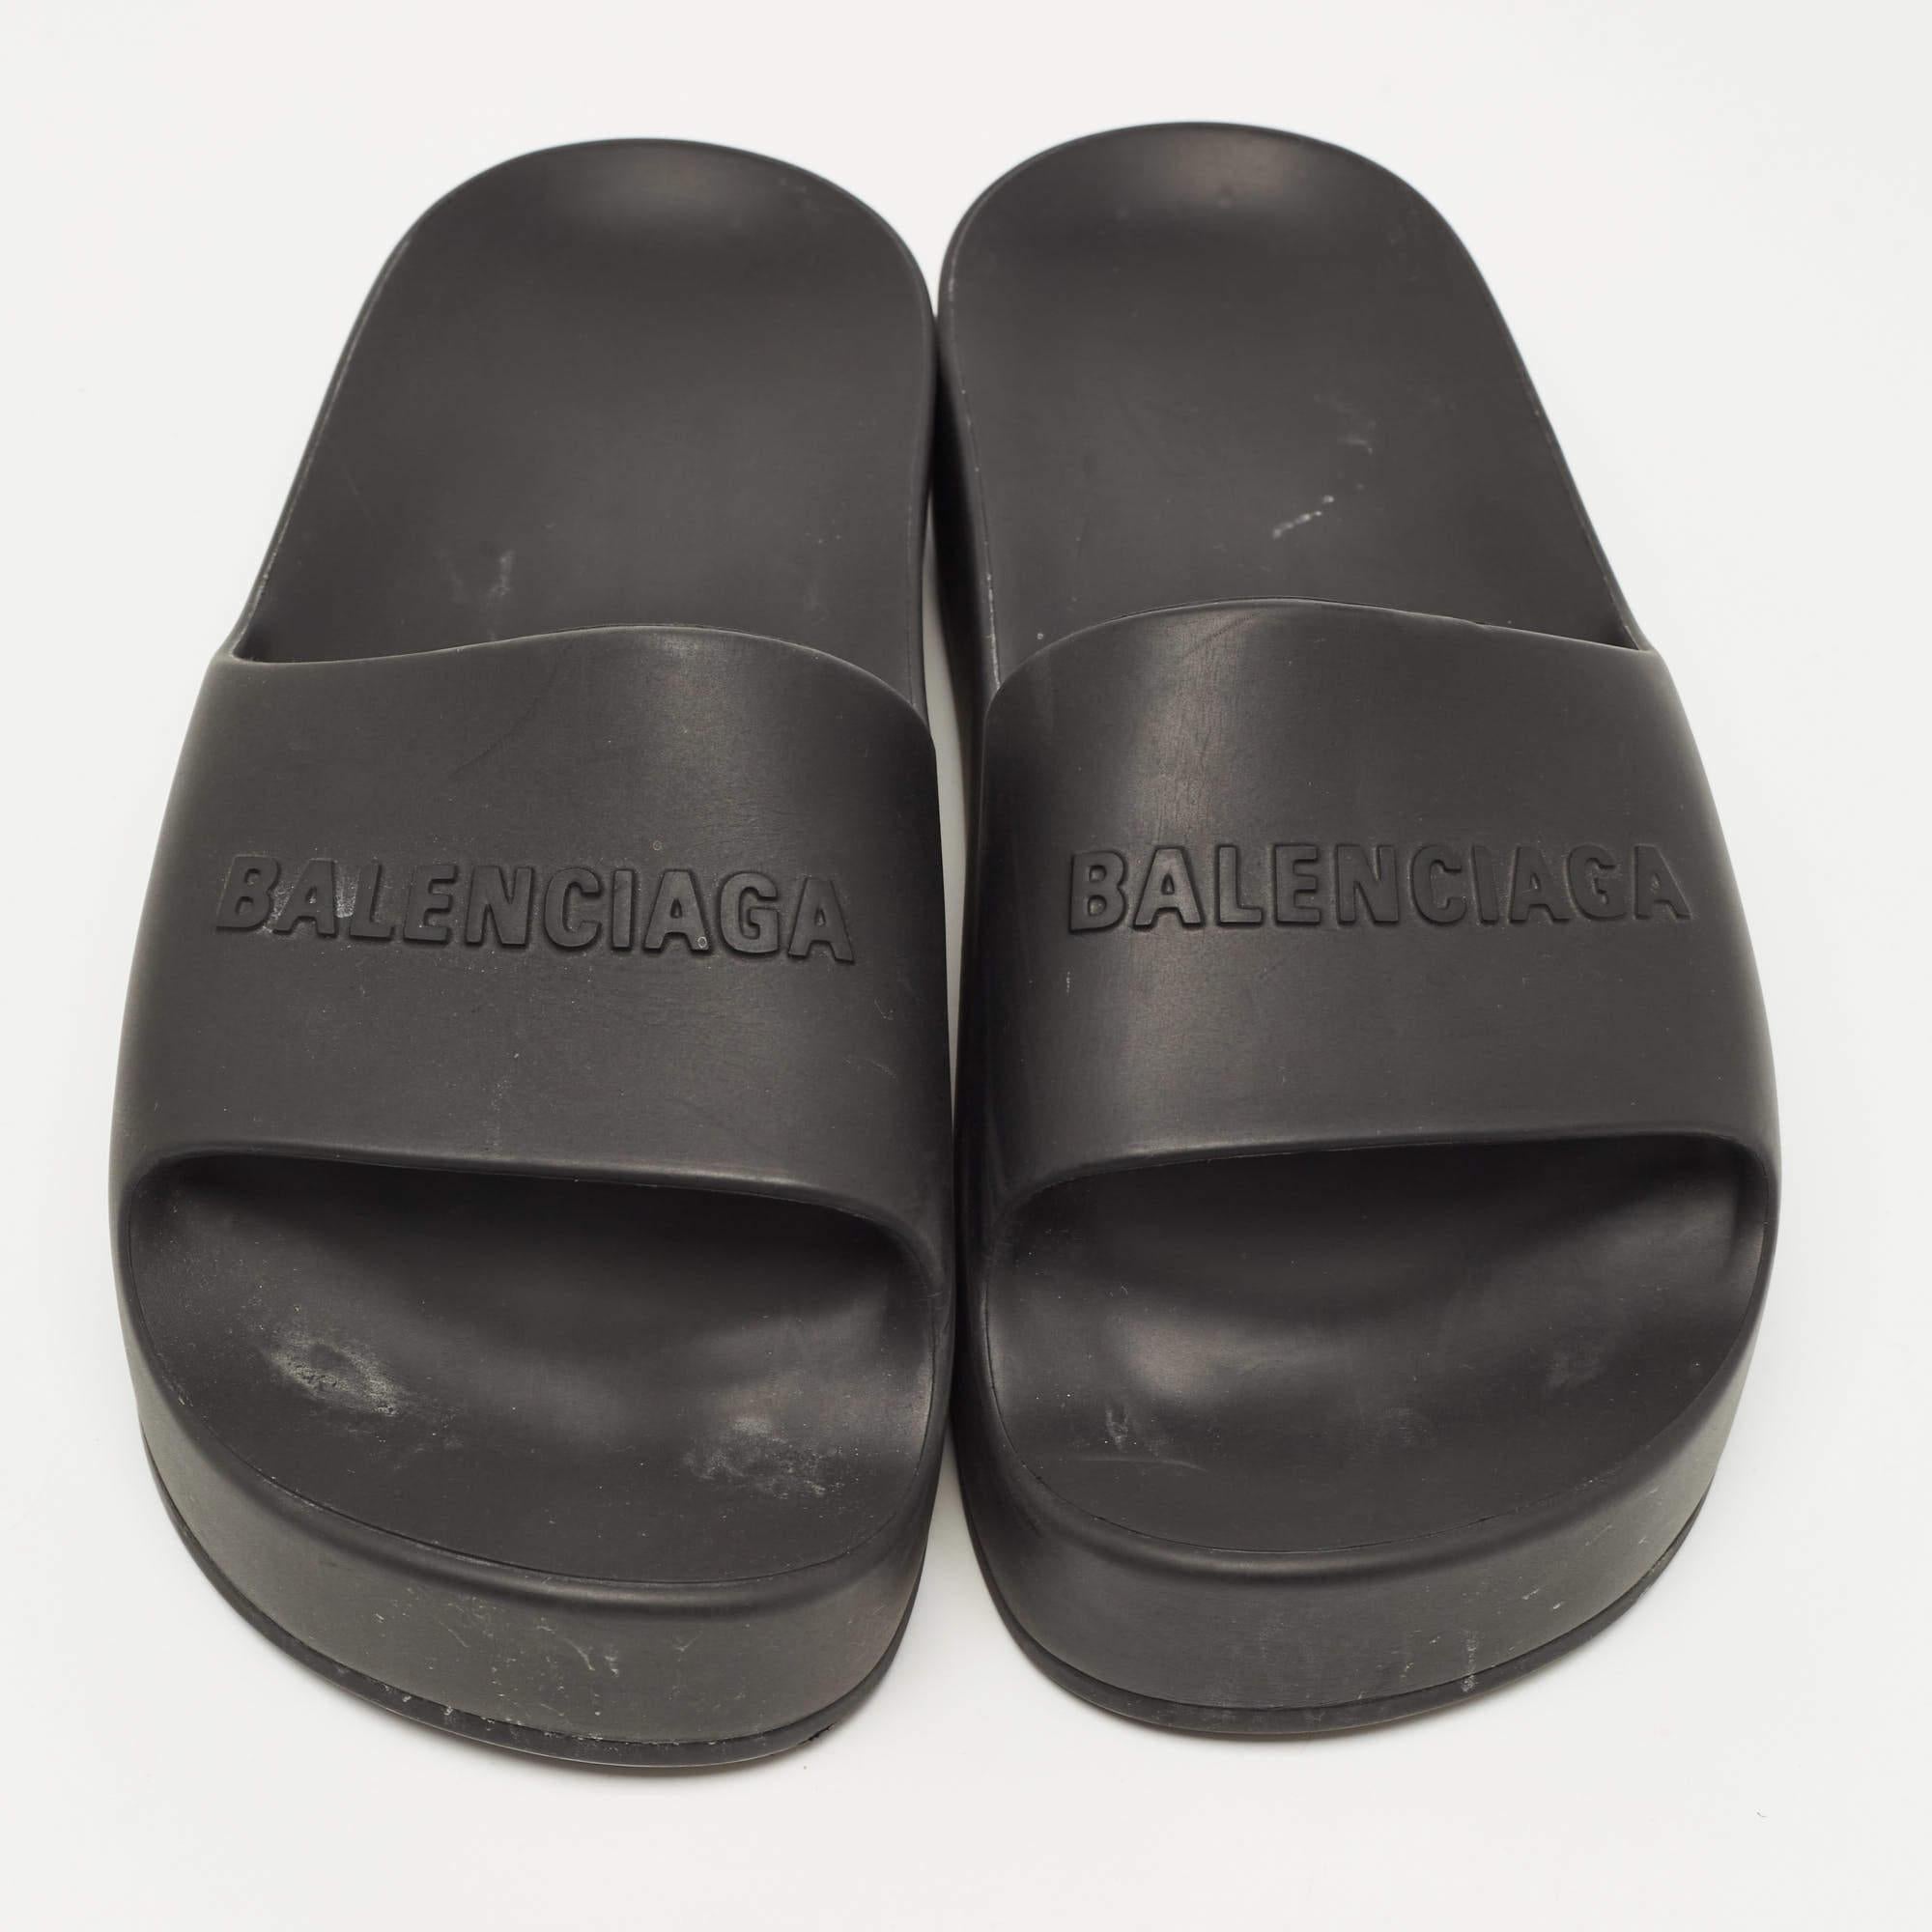 Enhance your casual looks with a touch of high style with these designer slides. Rendered in quality material with a lovely hue adorning its expanse, this pair is a must-have!

Includes: Original Dustbag

